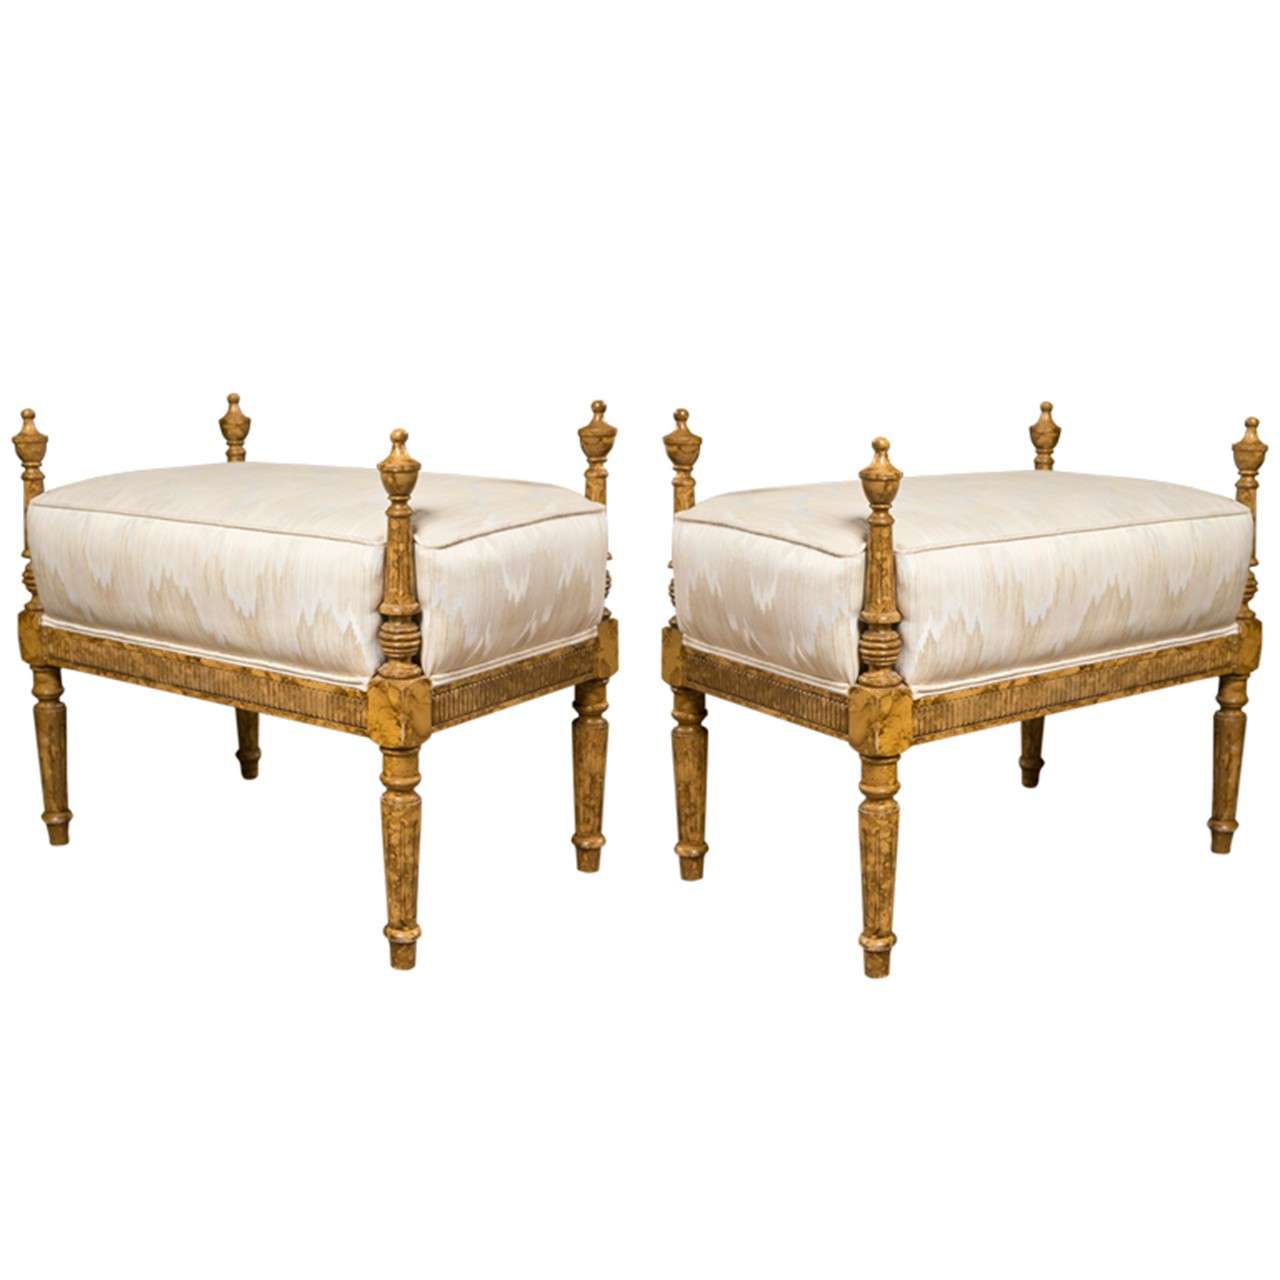 Pair of French Louis XVI Style Painted Benches 1940s Painted In Faux Finish